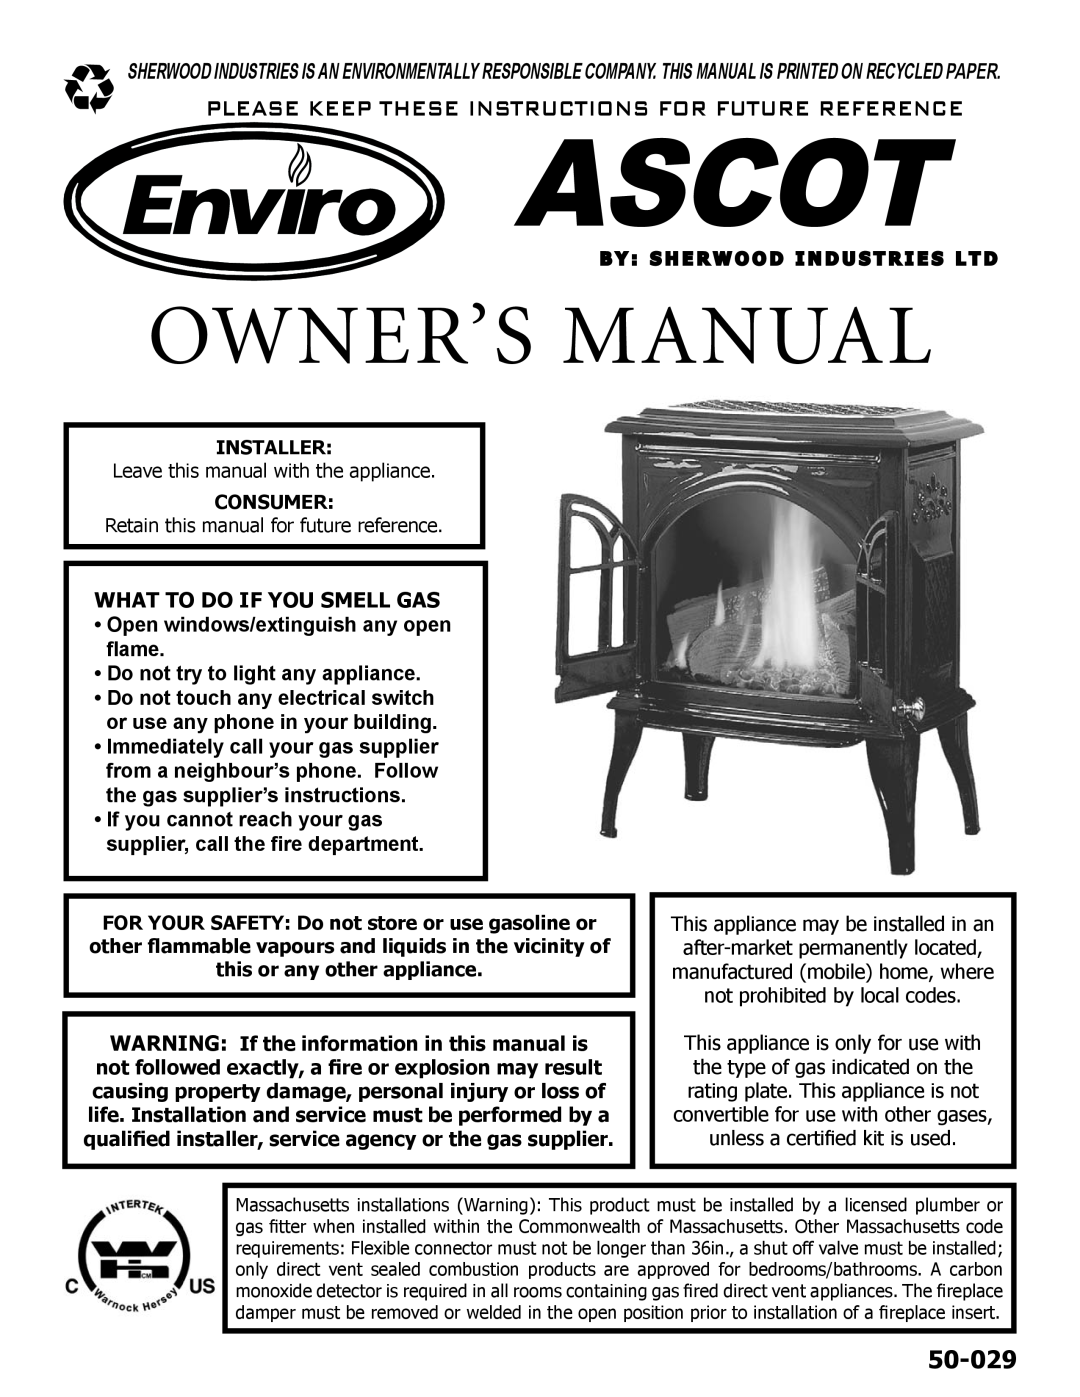 Enviro VENTED GAS FIREPLACE HEATER owner manual What To Do If You Smell Gas, Installer, Consumer, 50-029 